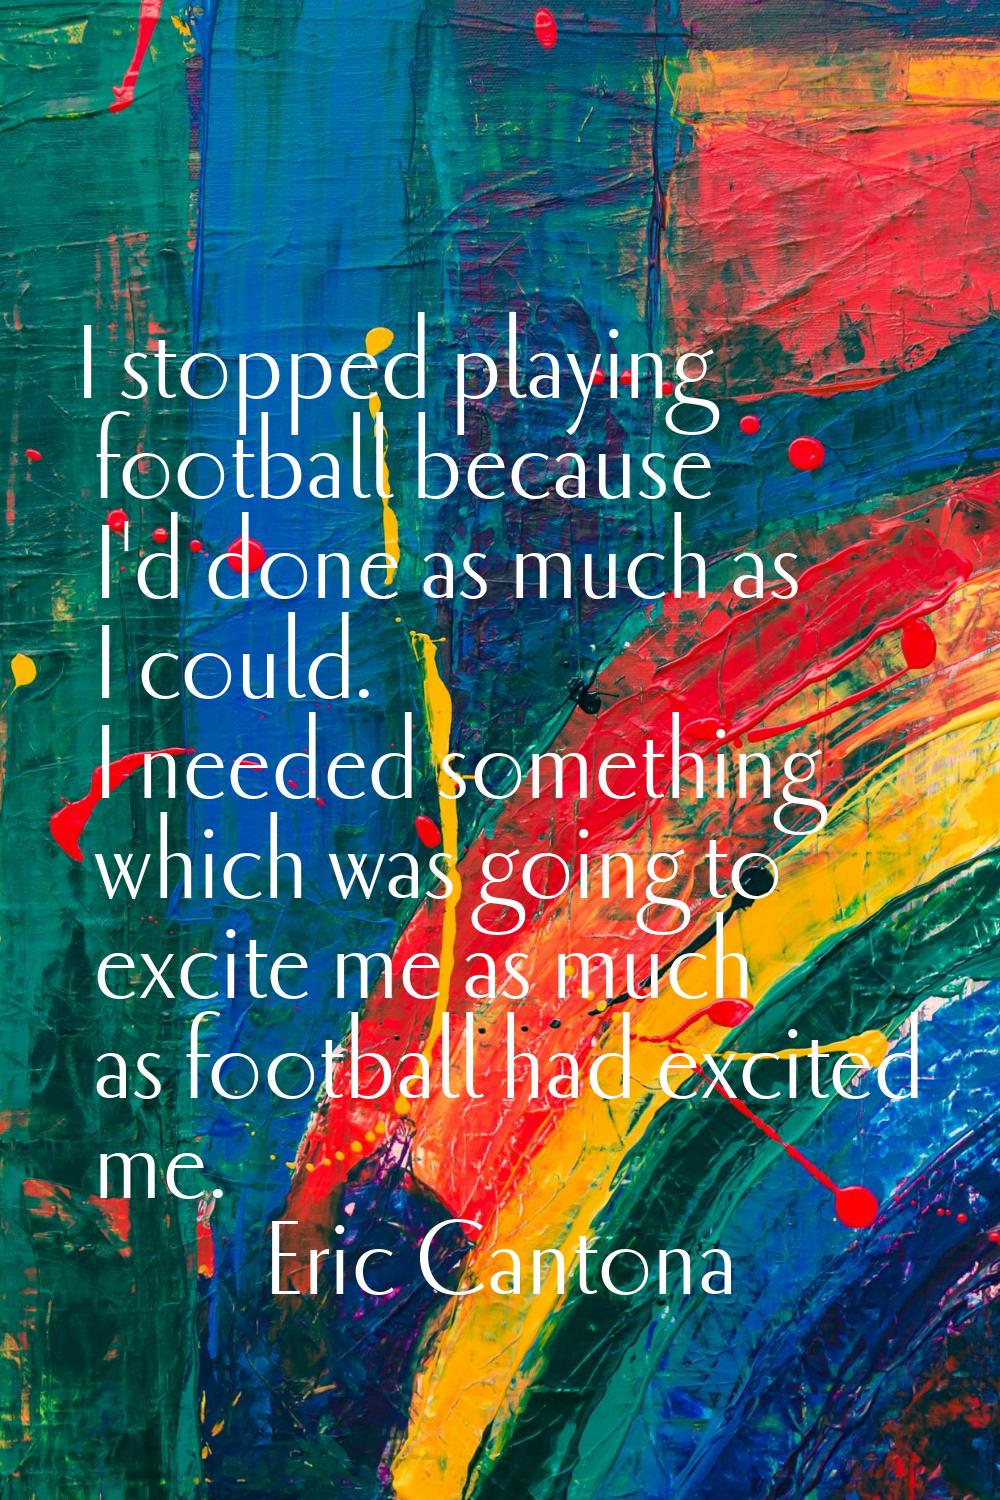 I stopped playing football because I'd done as much as I could. I needed something which was going 